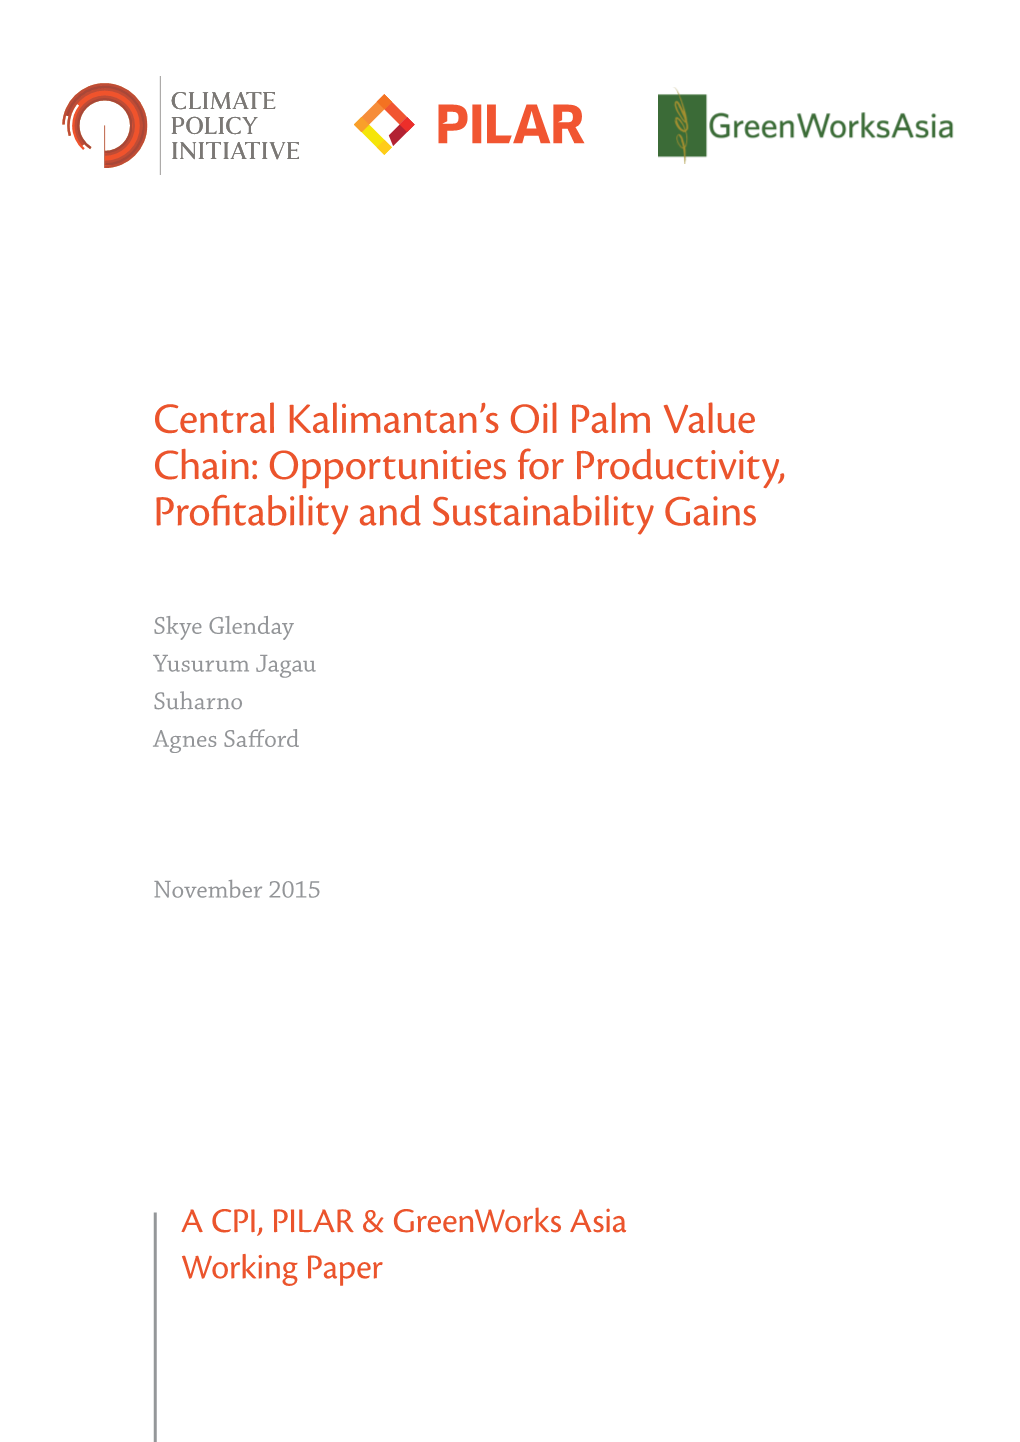 Central Kalimantan's Oil Palm Value Chain: Opportunities for Productivity